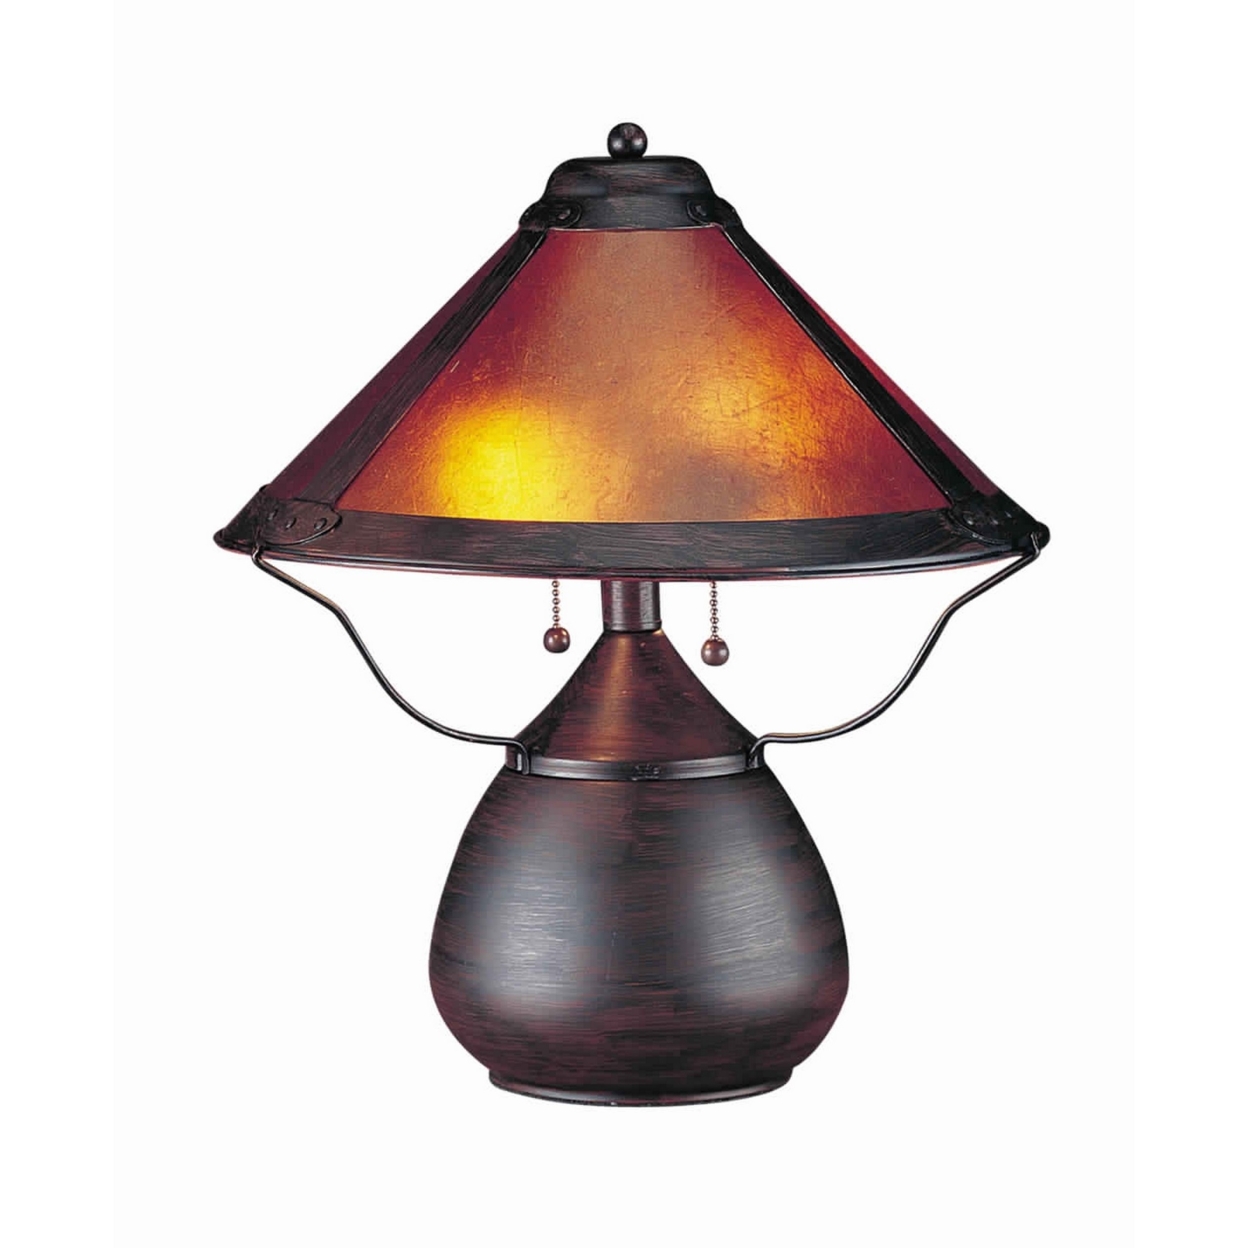 Pot Bellied Metal Body Table Lamp With Conical Mica Shade, Bronze- Saltoro Sherpi